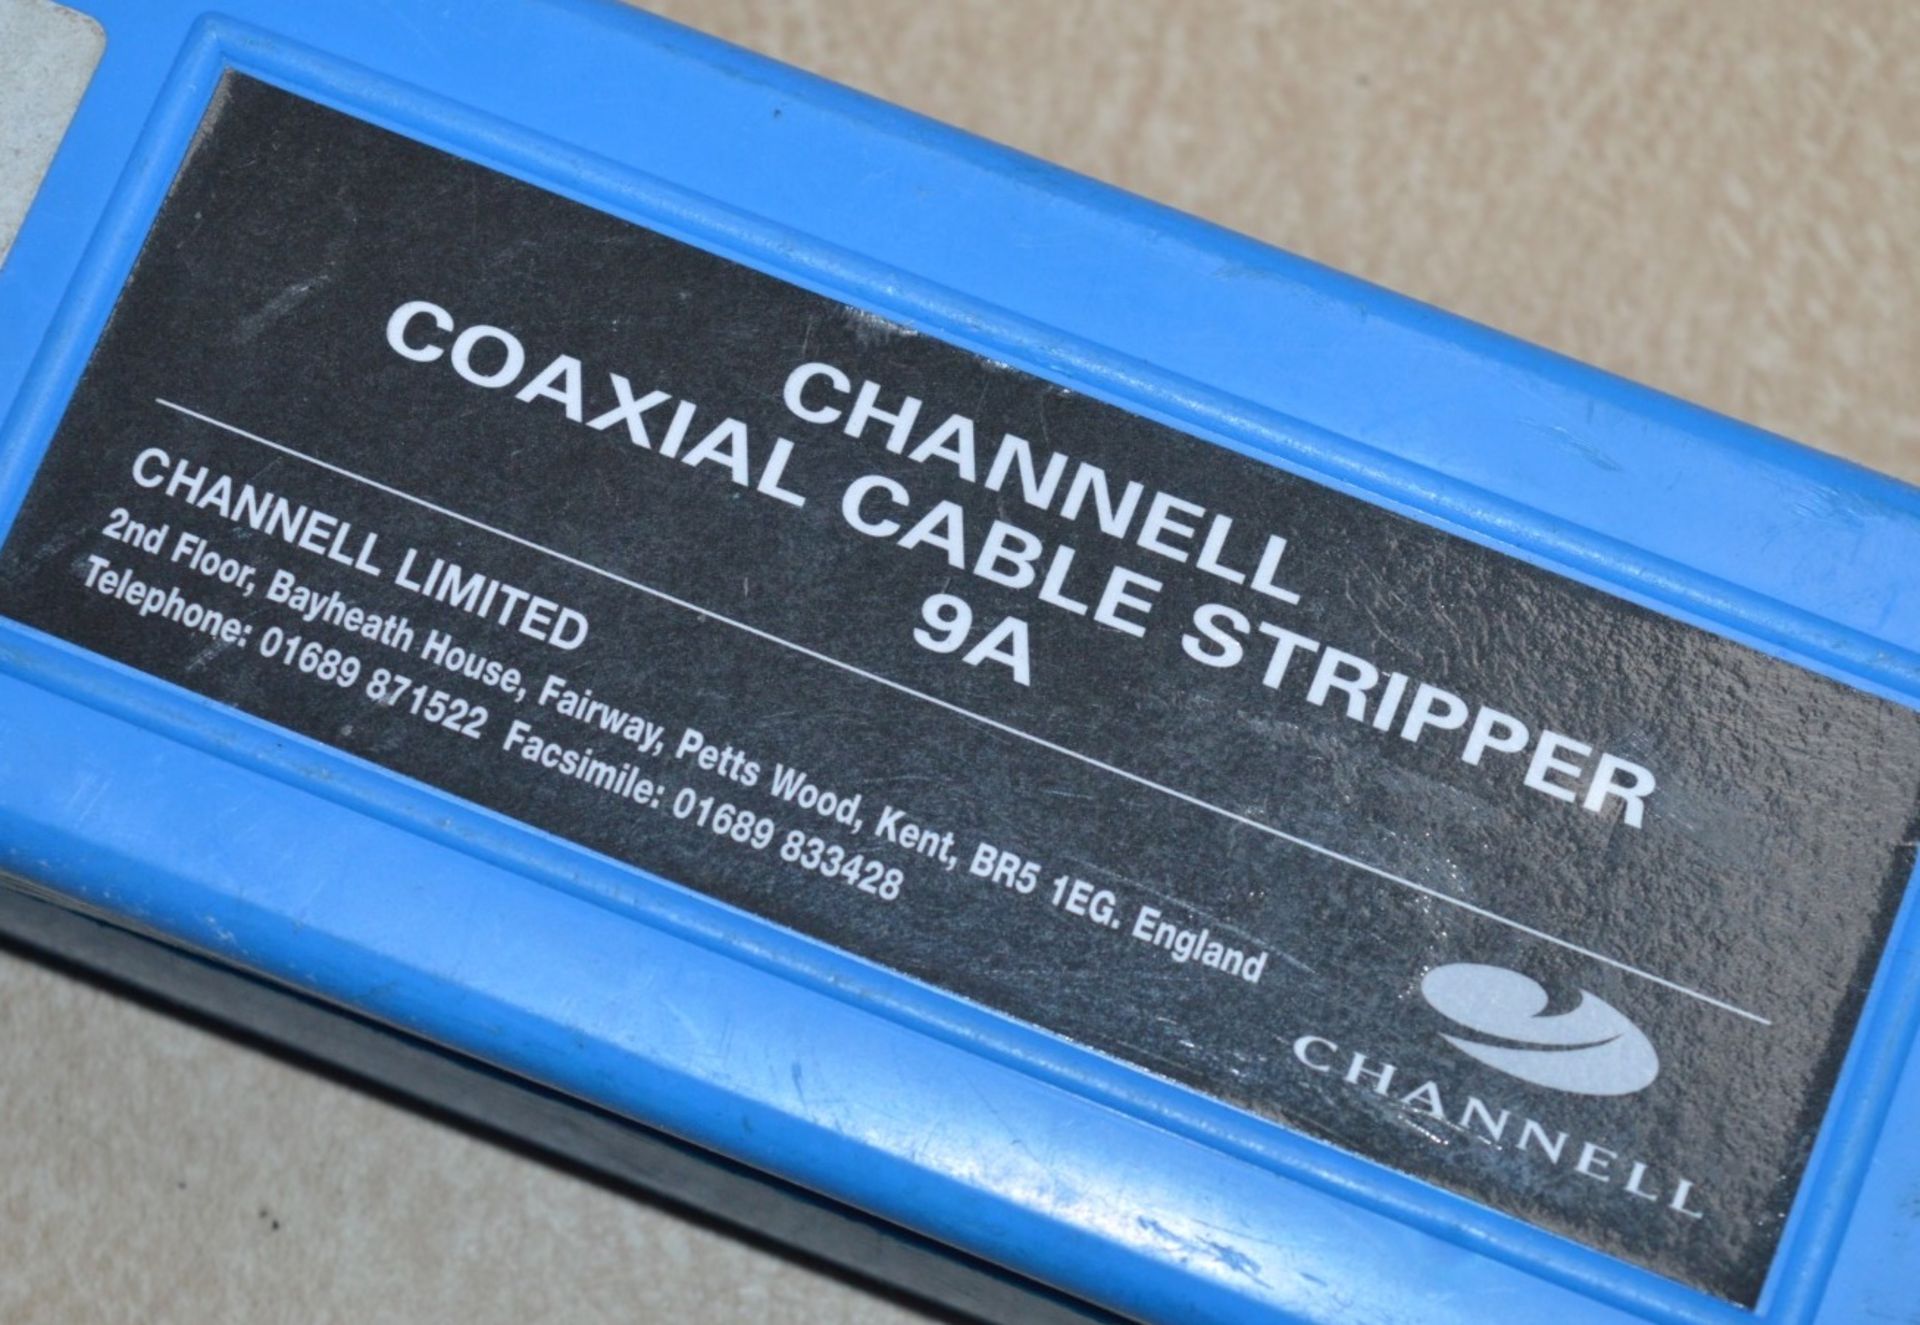 4 x Channell Coaxial Cable Strippers - Model 9A - In Cases With Accessories - CL011 - Ref JP938 - - Image 6 of 6